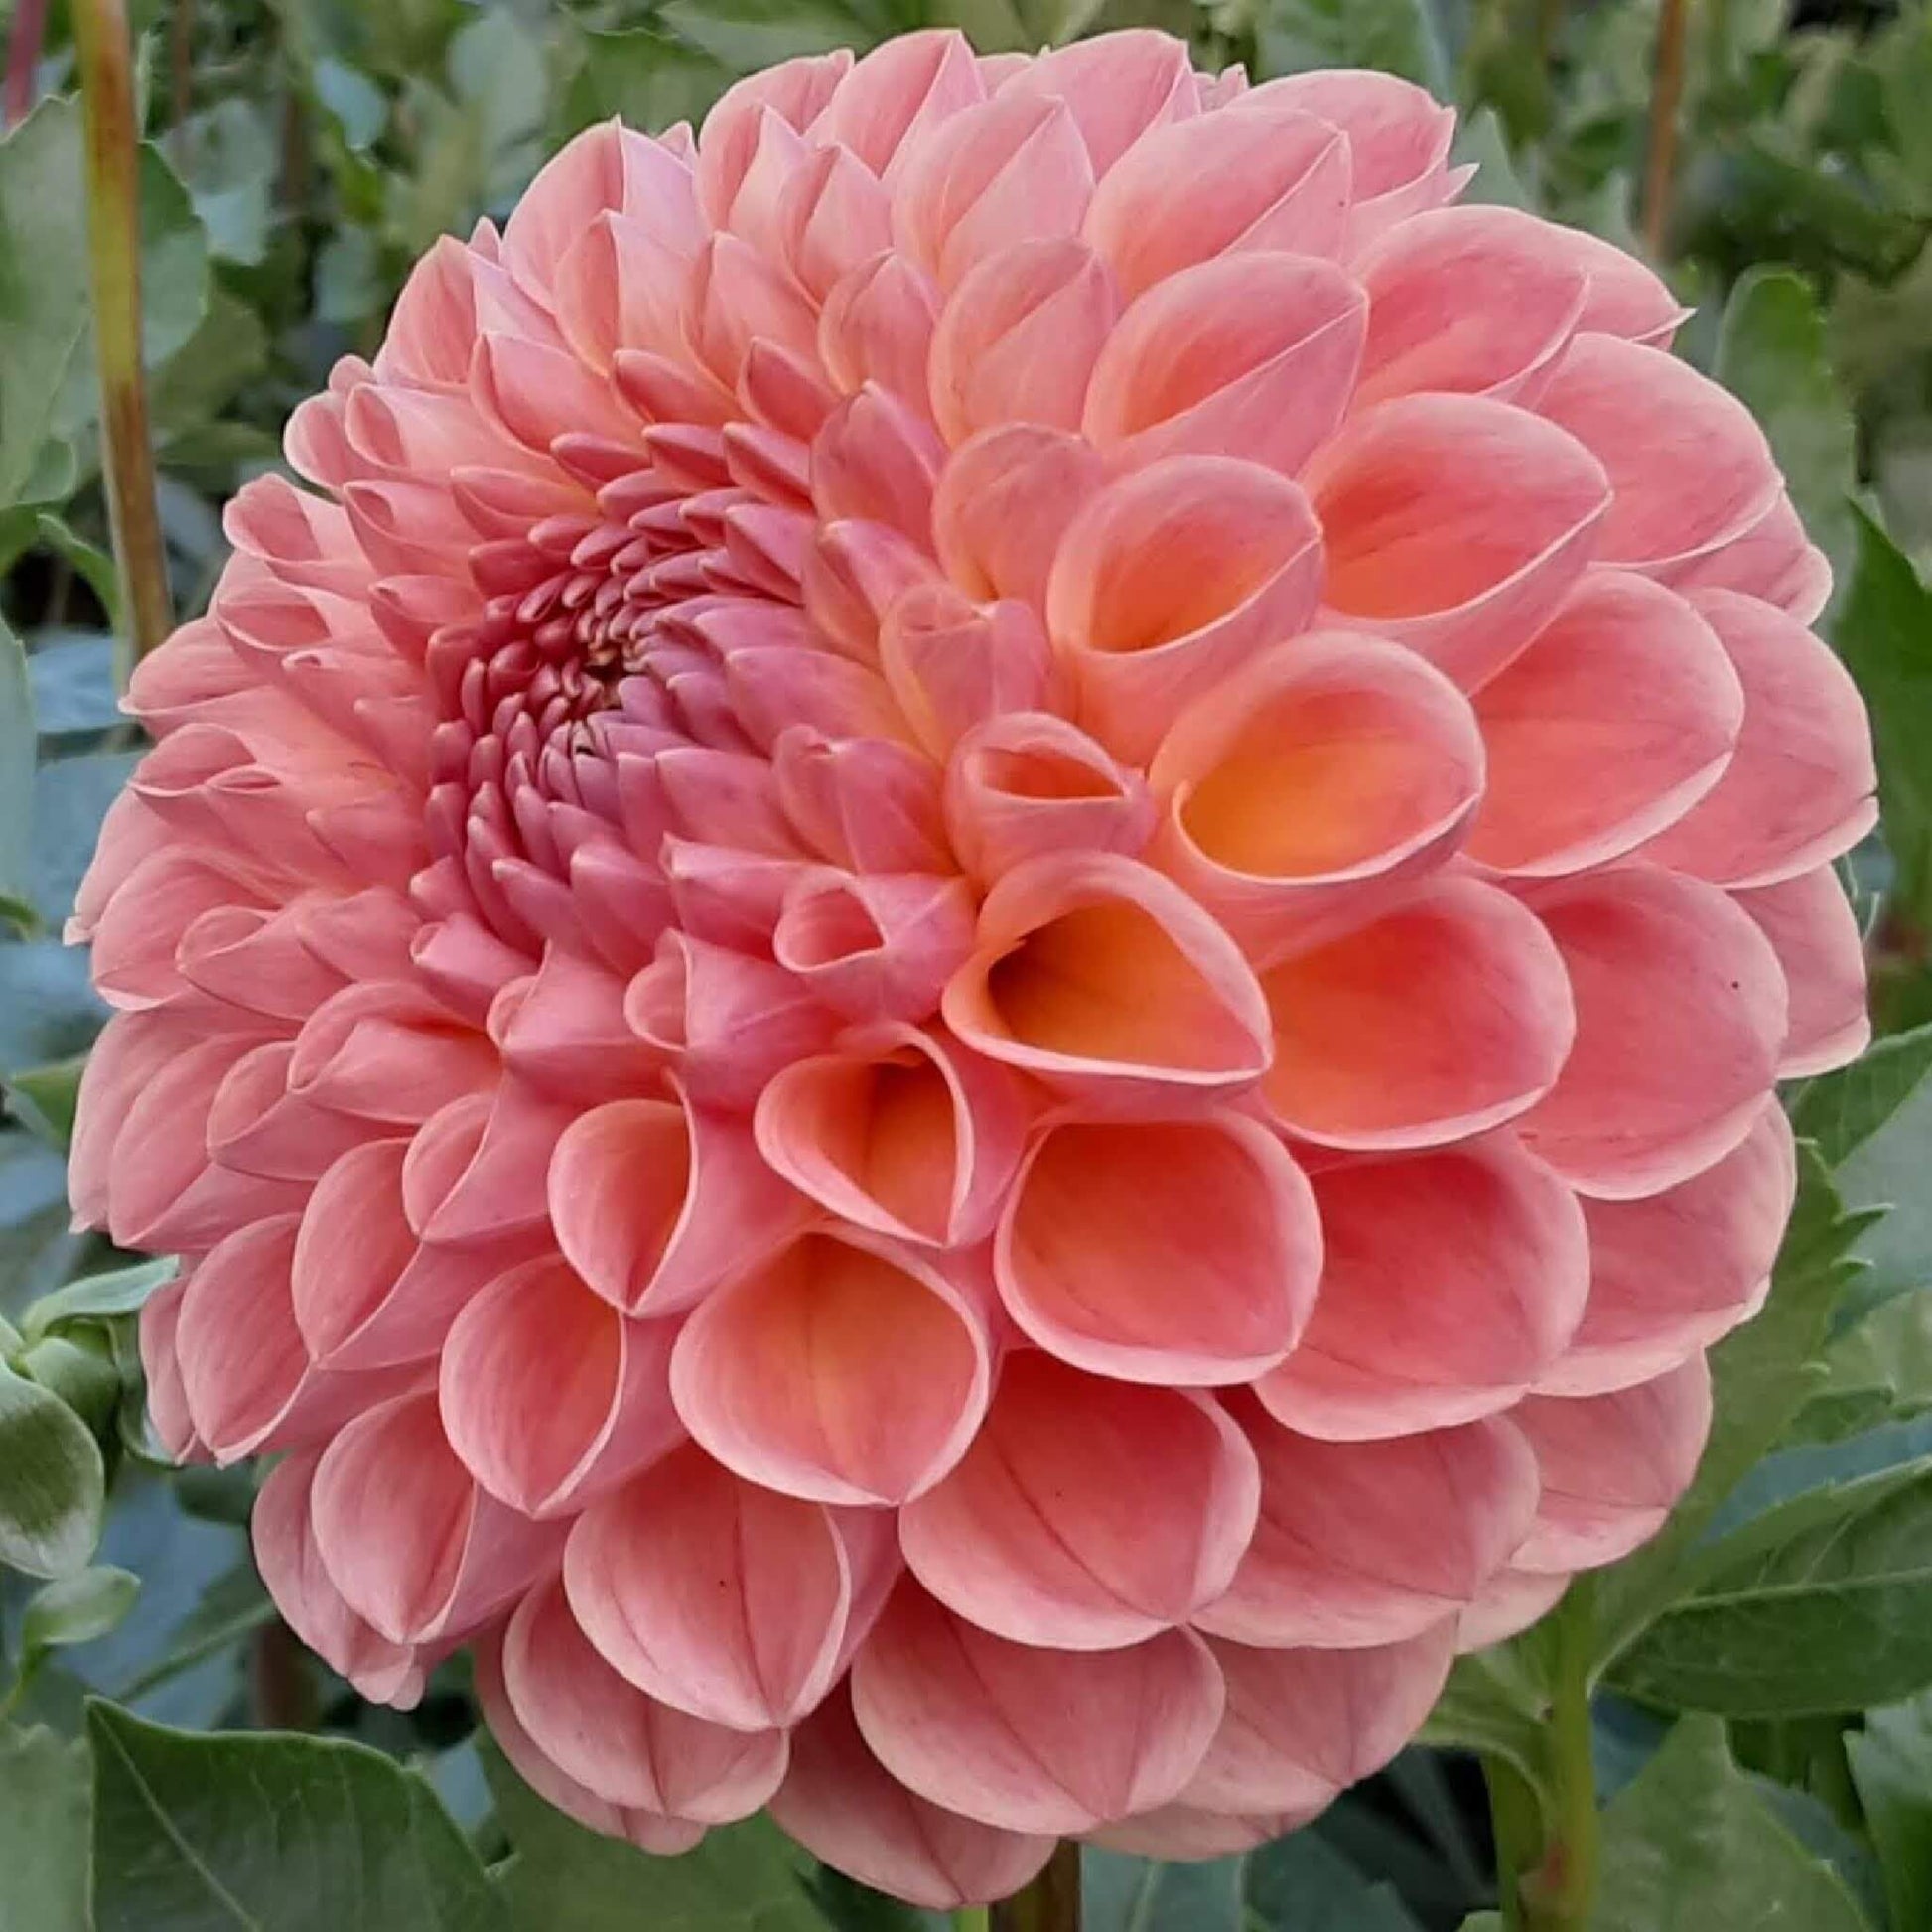 Clearview Peachy dahlia tubers for sale